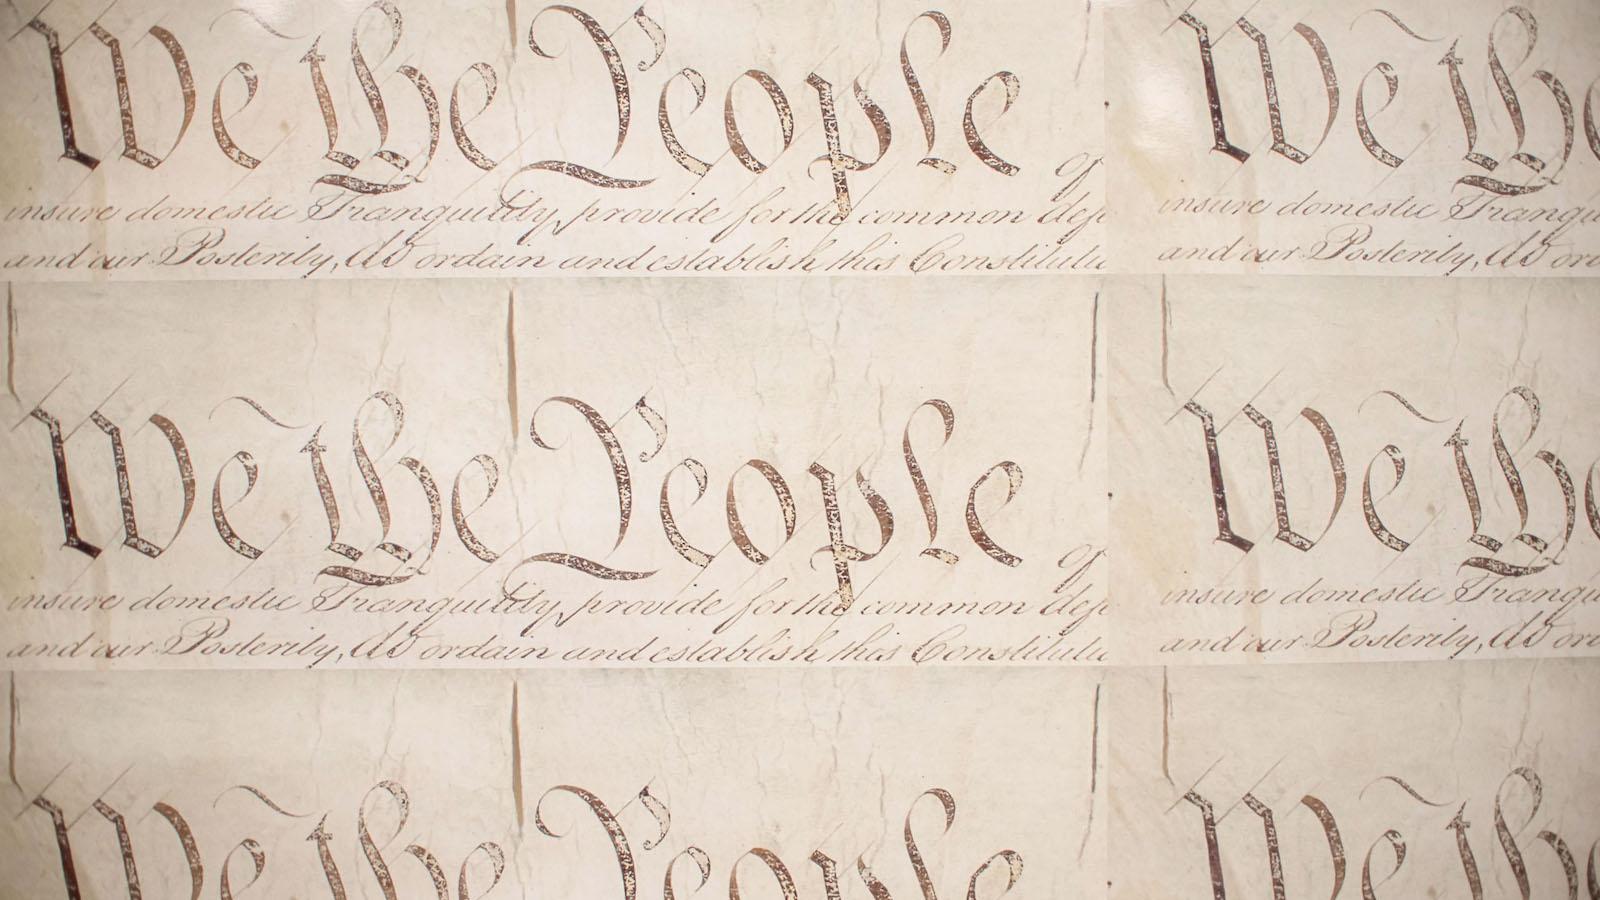 We the People.